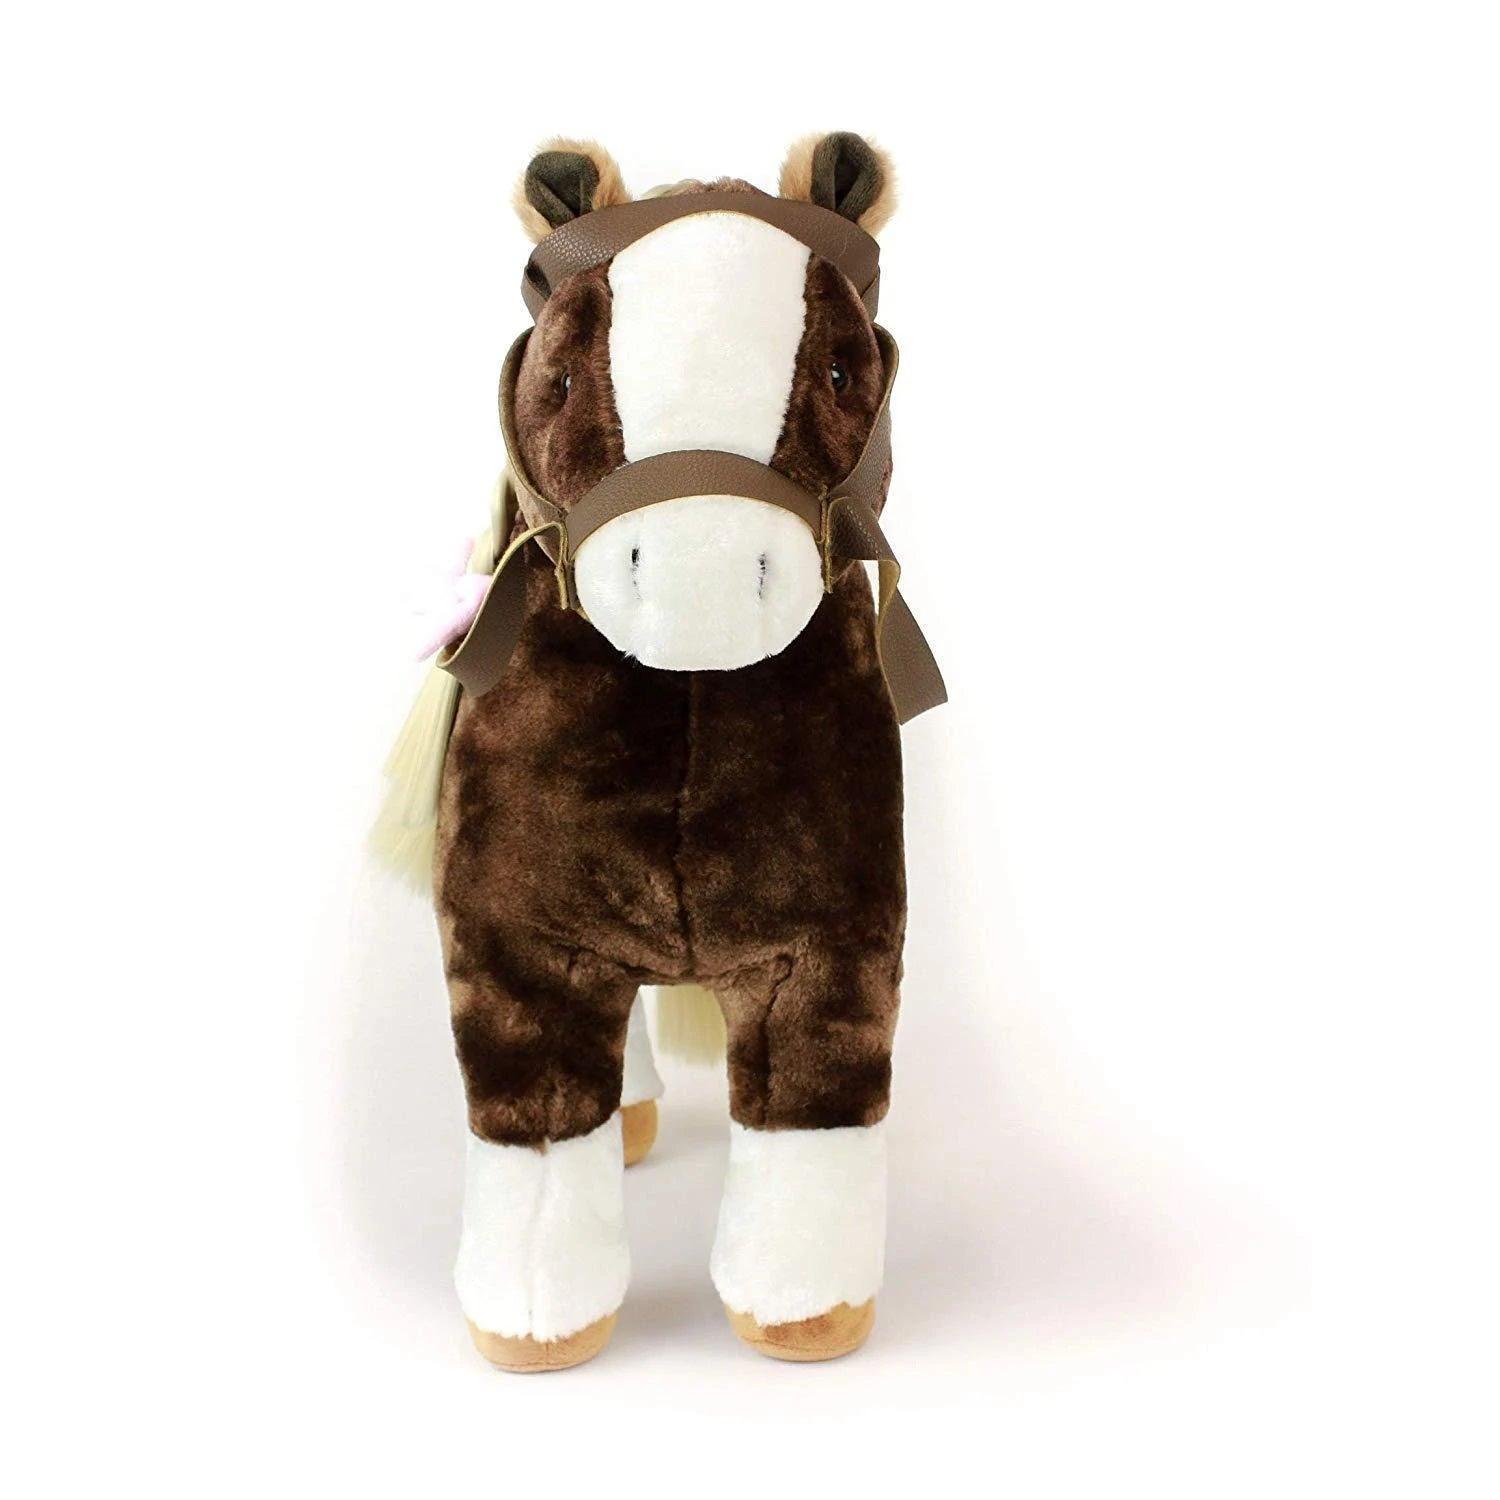 Playtime by Eimmie Doll Accessories Plush Horse with Saddle for 18 Inch Dolls - OrangeOnions Wholesale